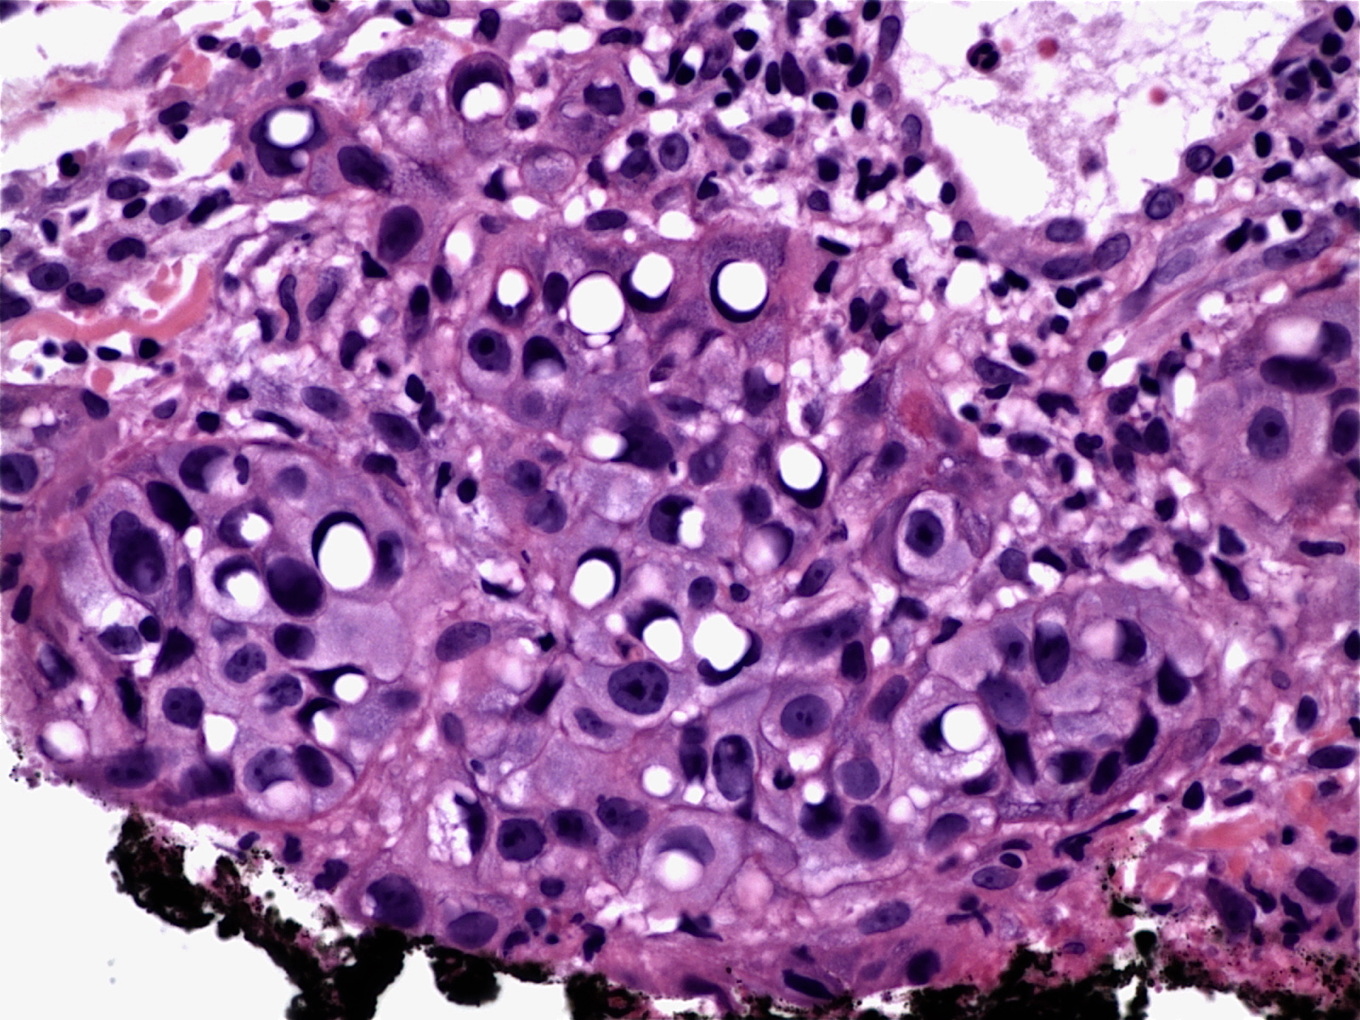 Signet-Ring Cell Gastric Adenocarcinoma: Image of the Month